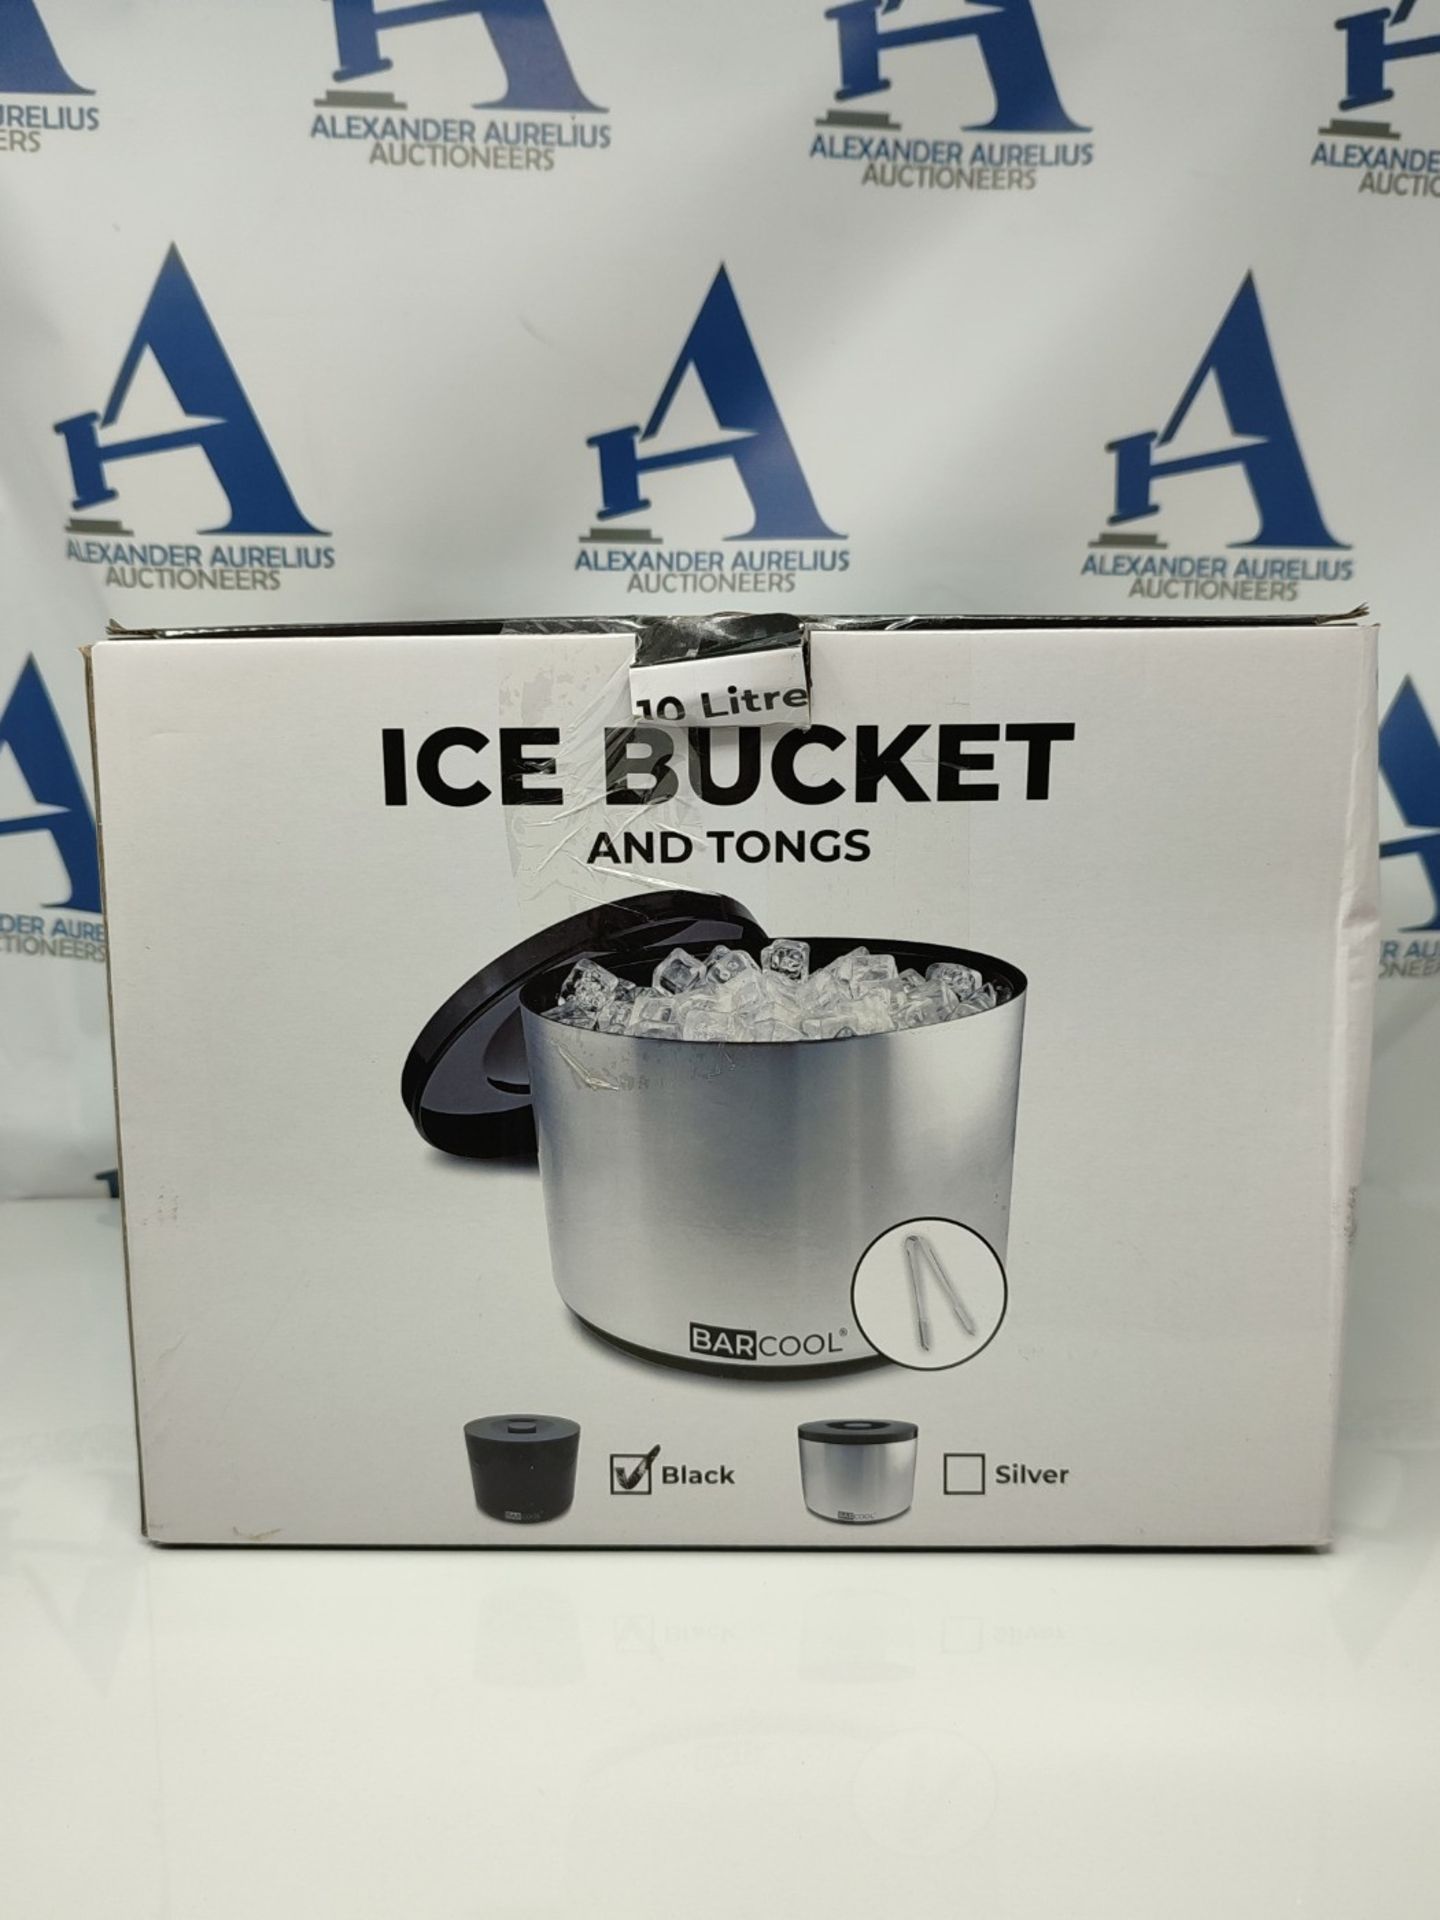 Barcool Ice Bucket with Lid and Ice Tongs | 10 Litre | Round & Double Walled Insulatio - Image 2 of 2